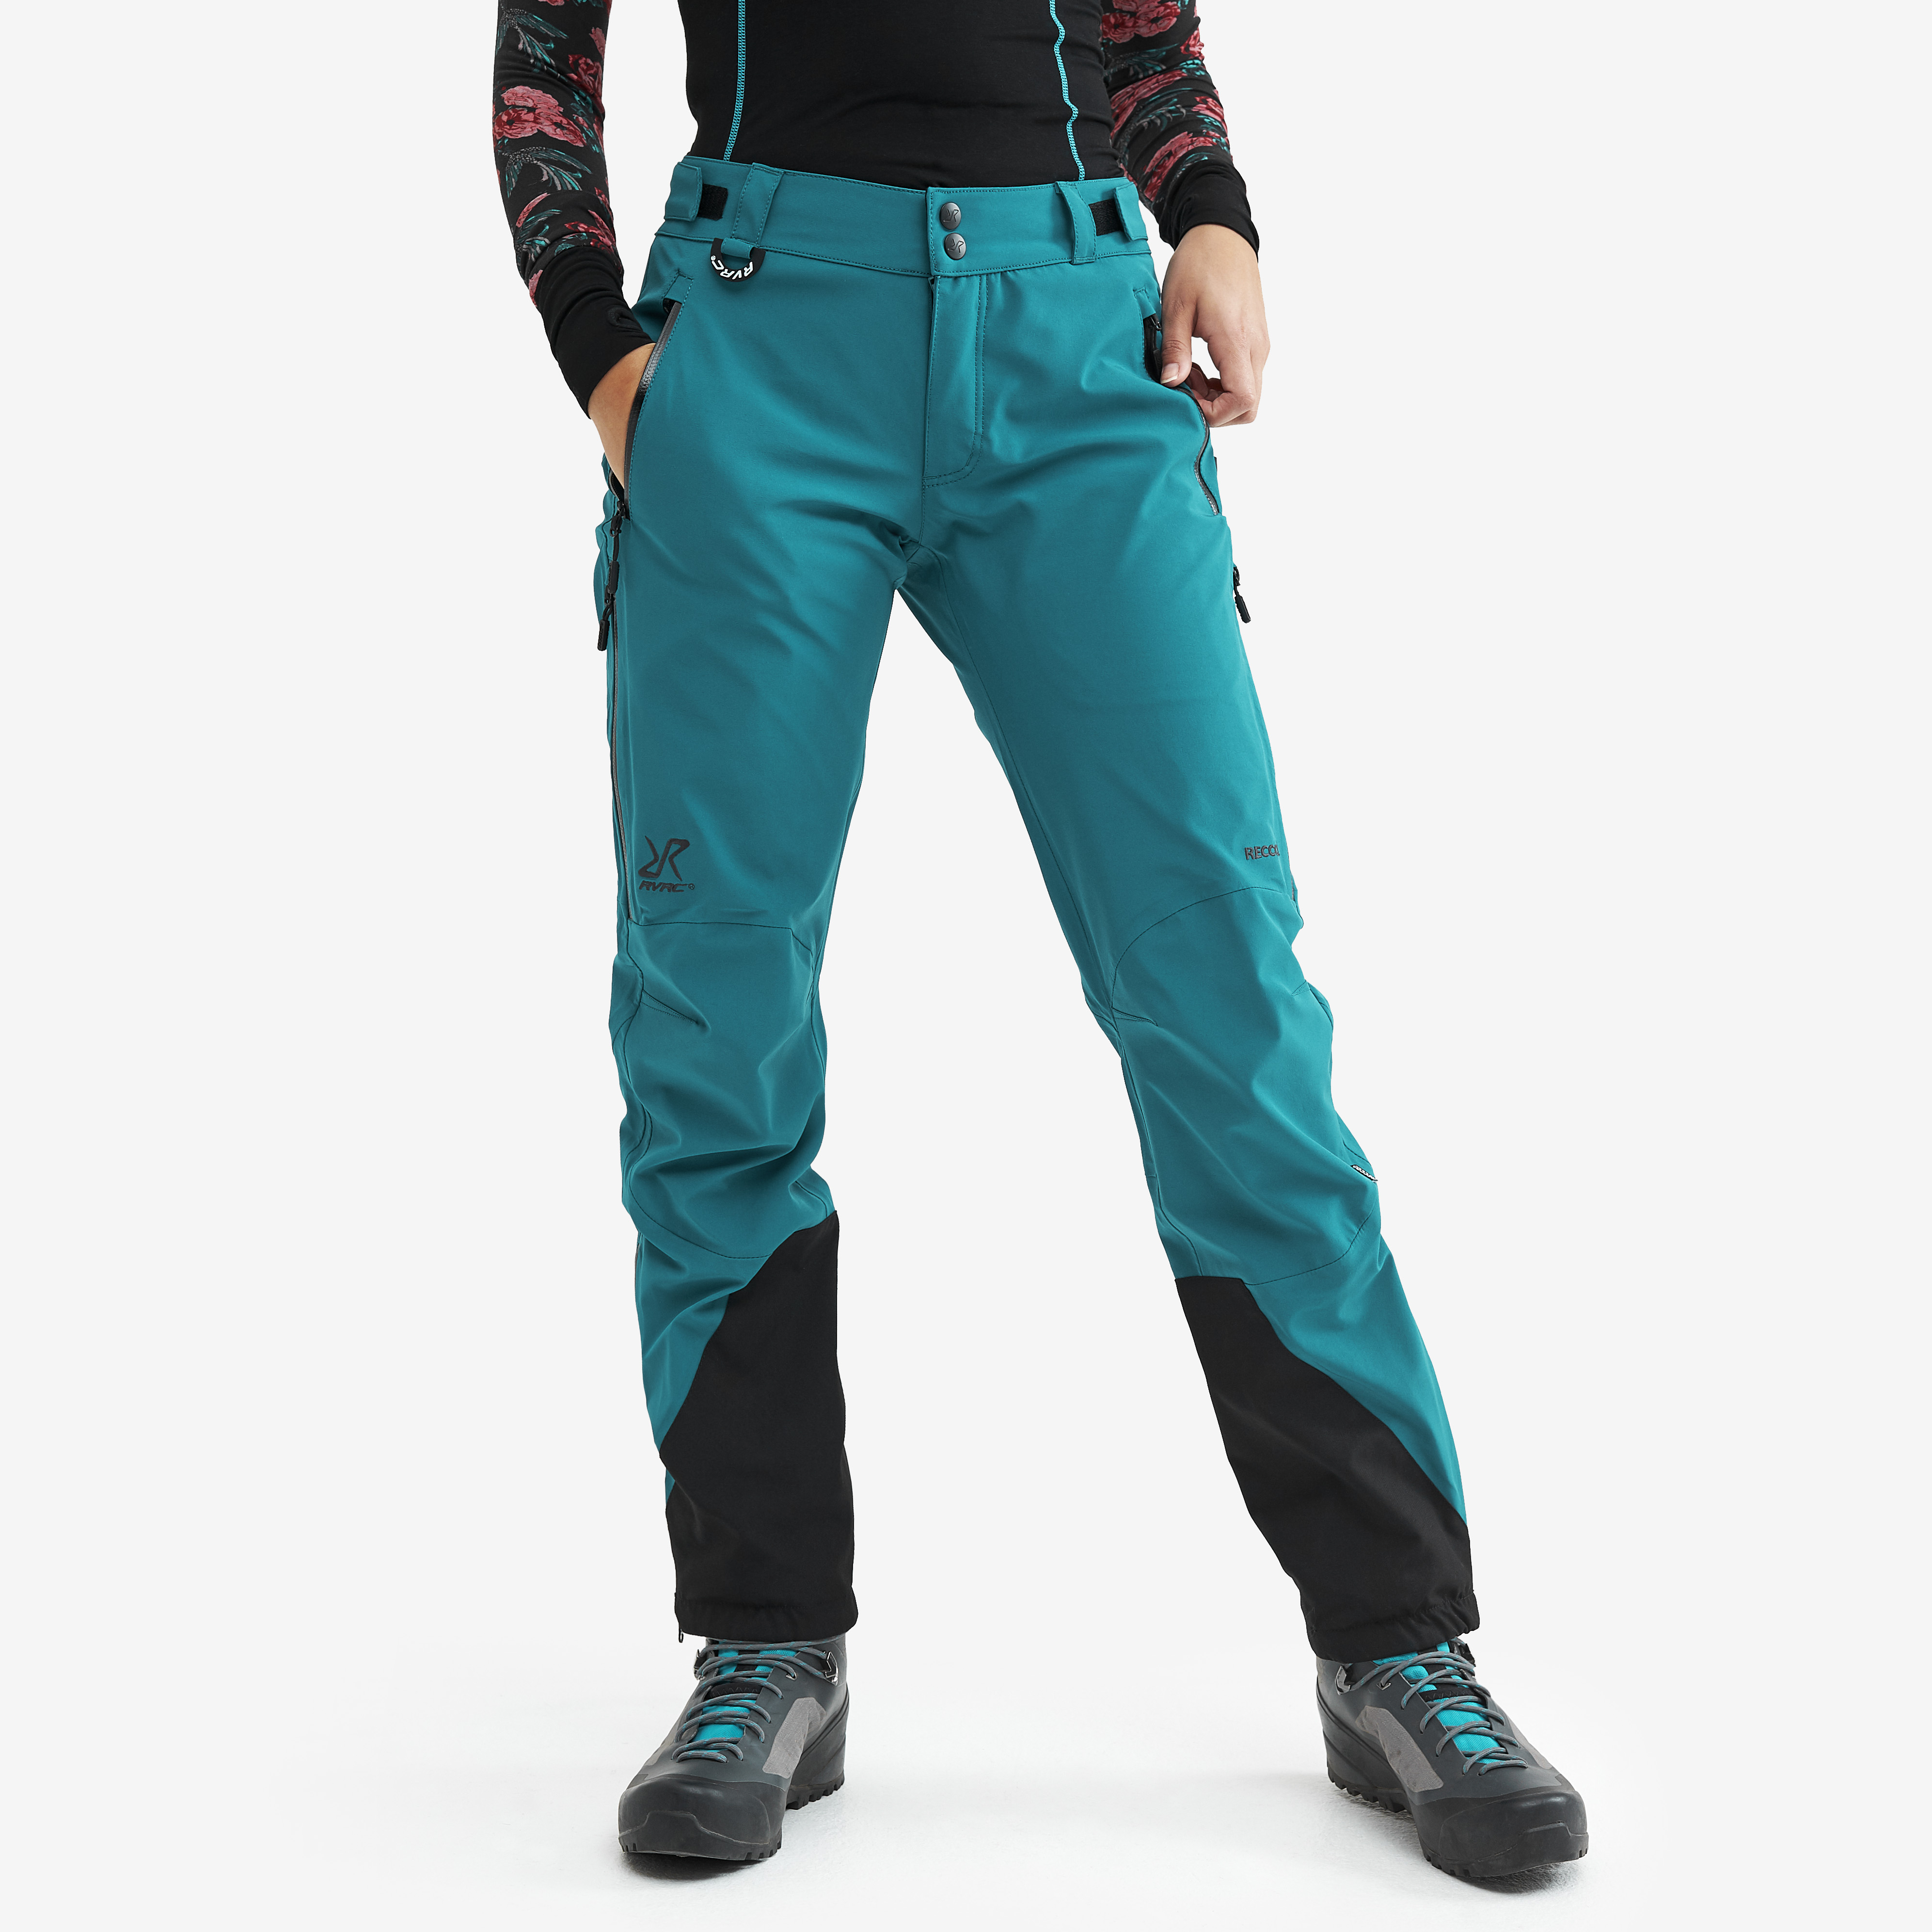 Cyclone Rescue Pants Dark Turquoise Femme